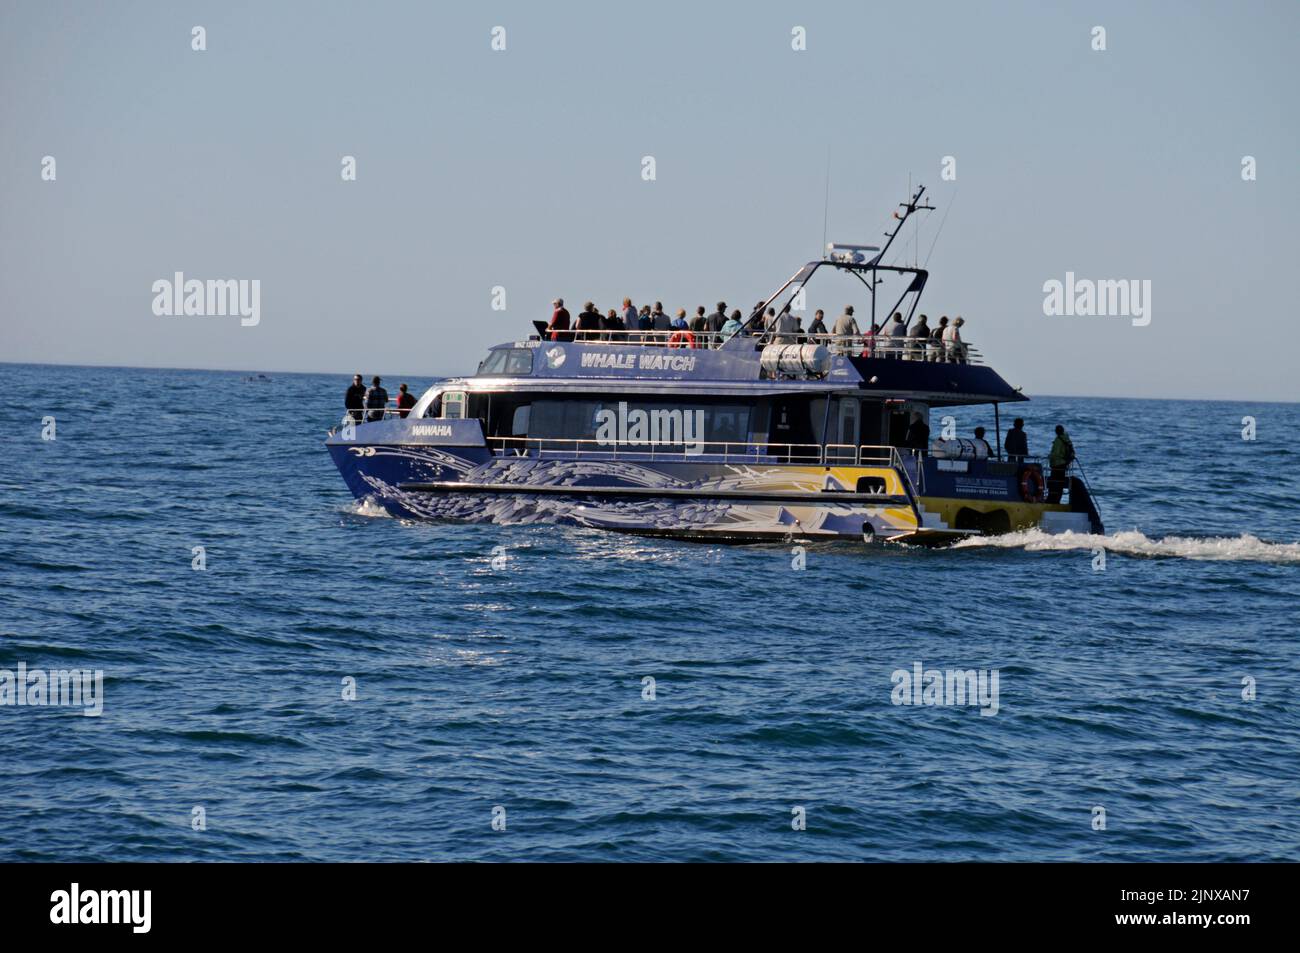 A tourist whale-watching boat  heads out into the Pacific Ocean near Kaikoura on South Island, New Zealand Stock Photo